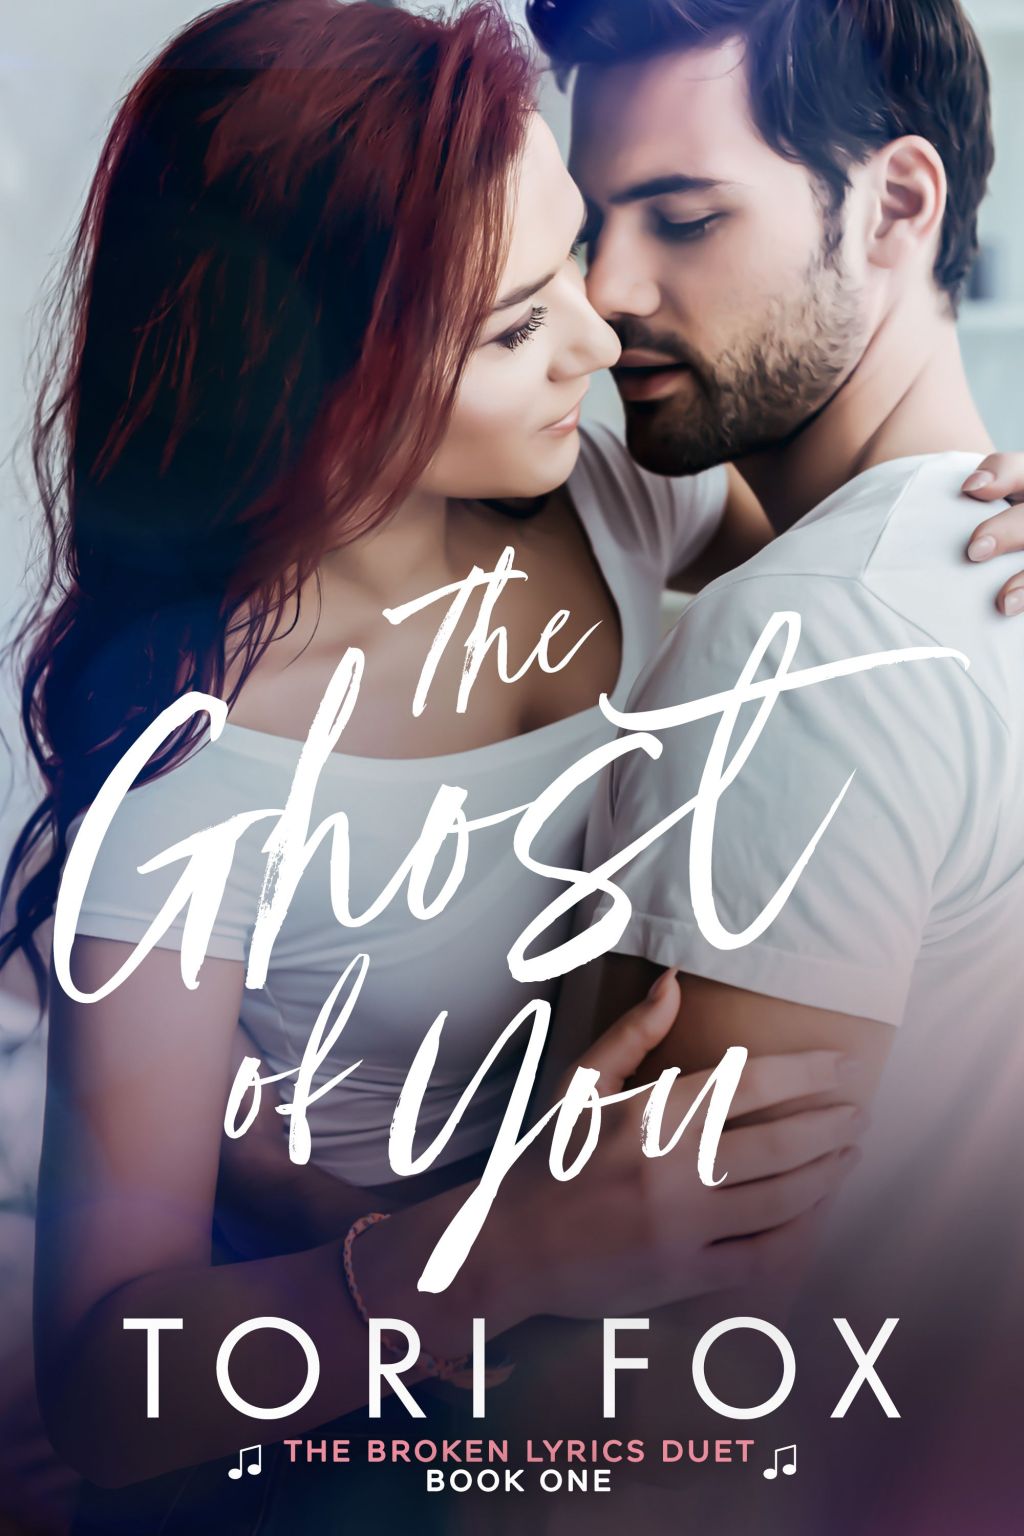 Release Promotion: THE GHOST OF YOU by TORI FOX